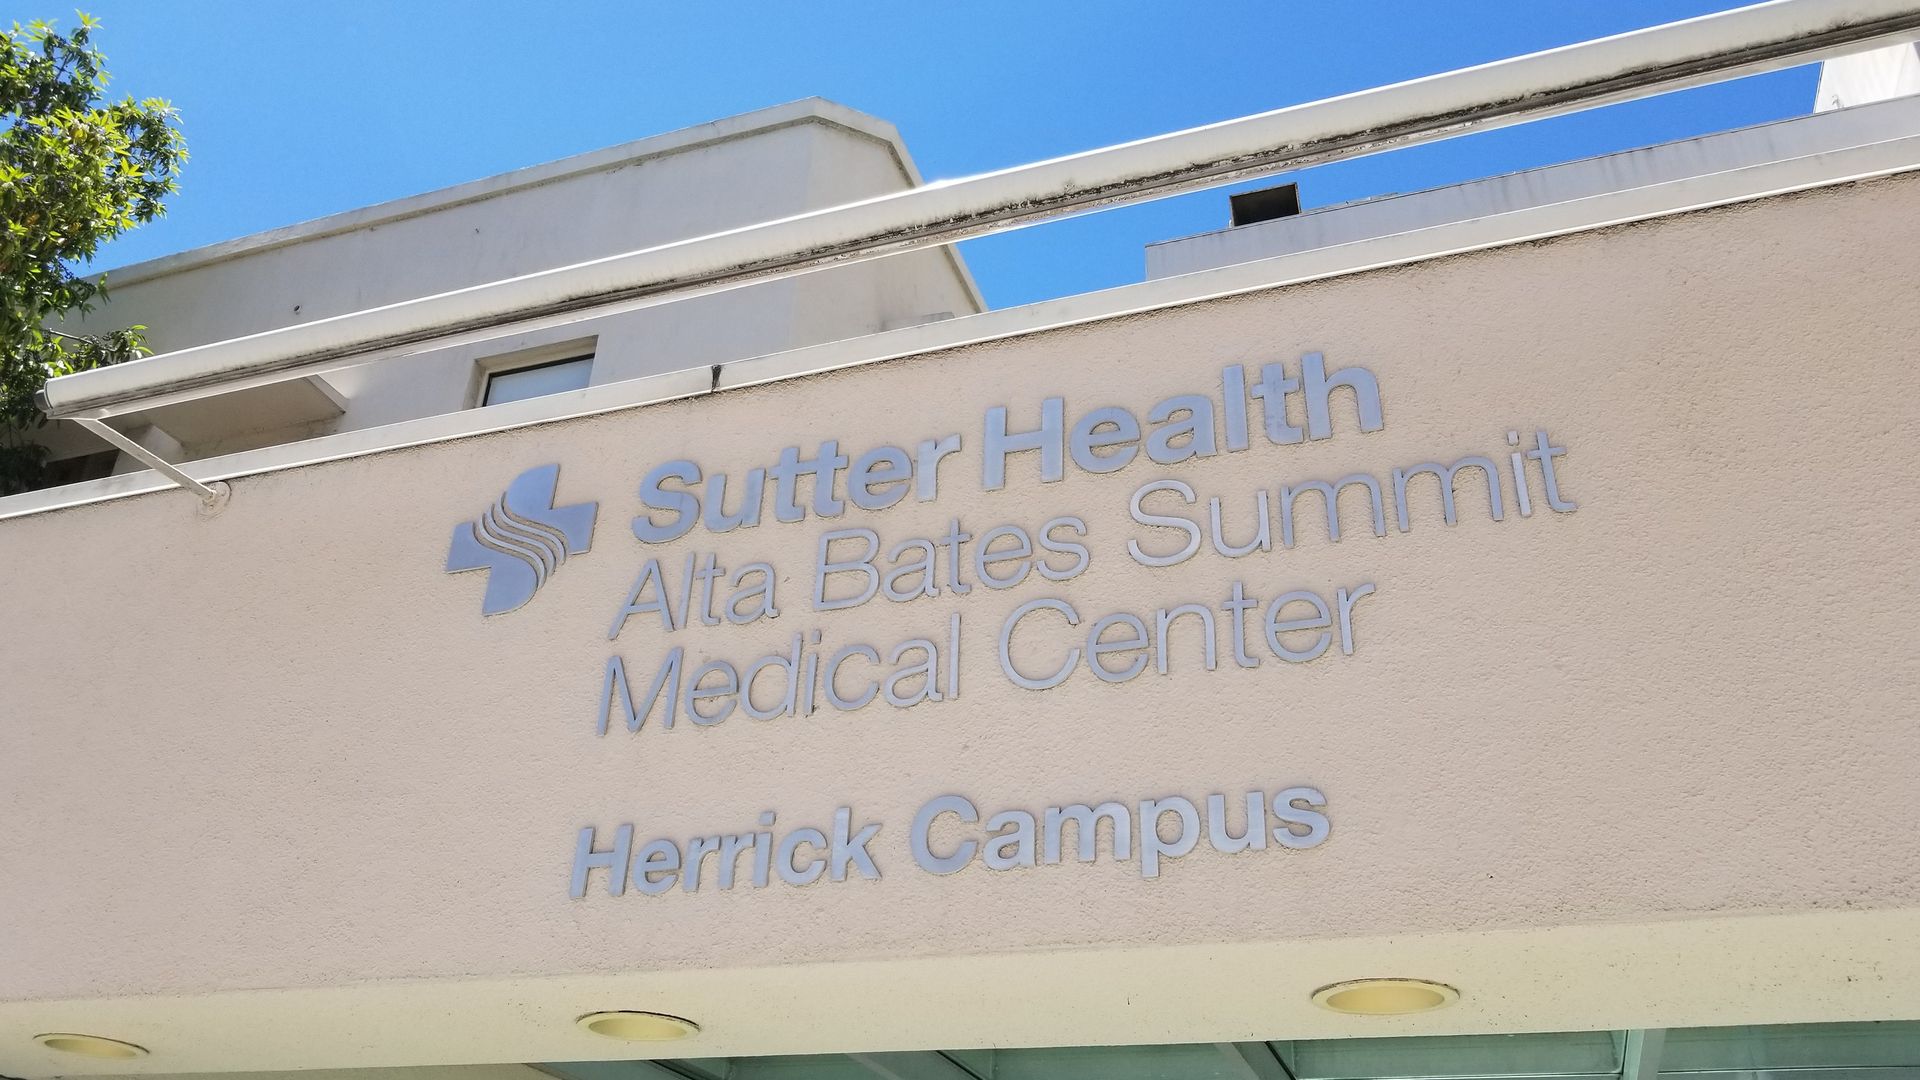 A sign showing the Sutter Health Alta Bates Summit Medical Center.